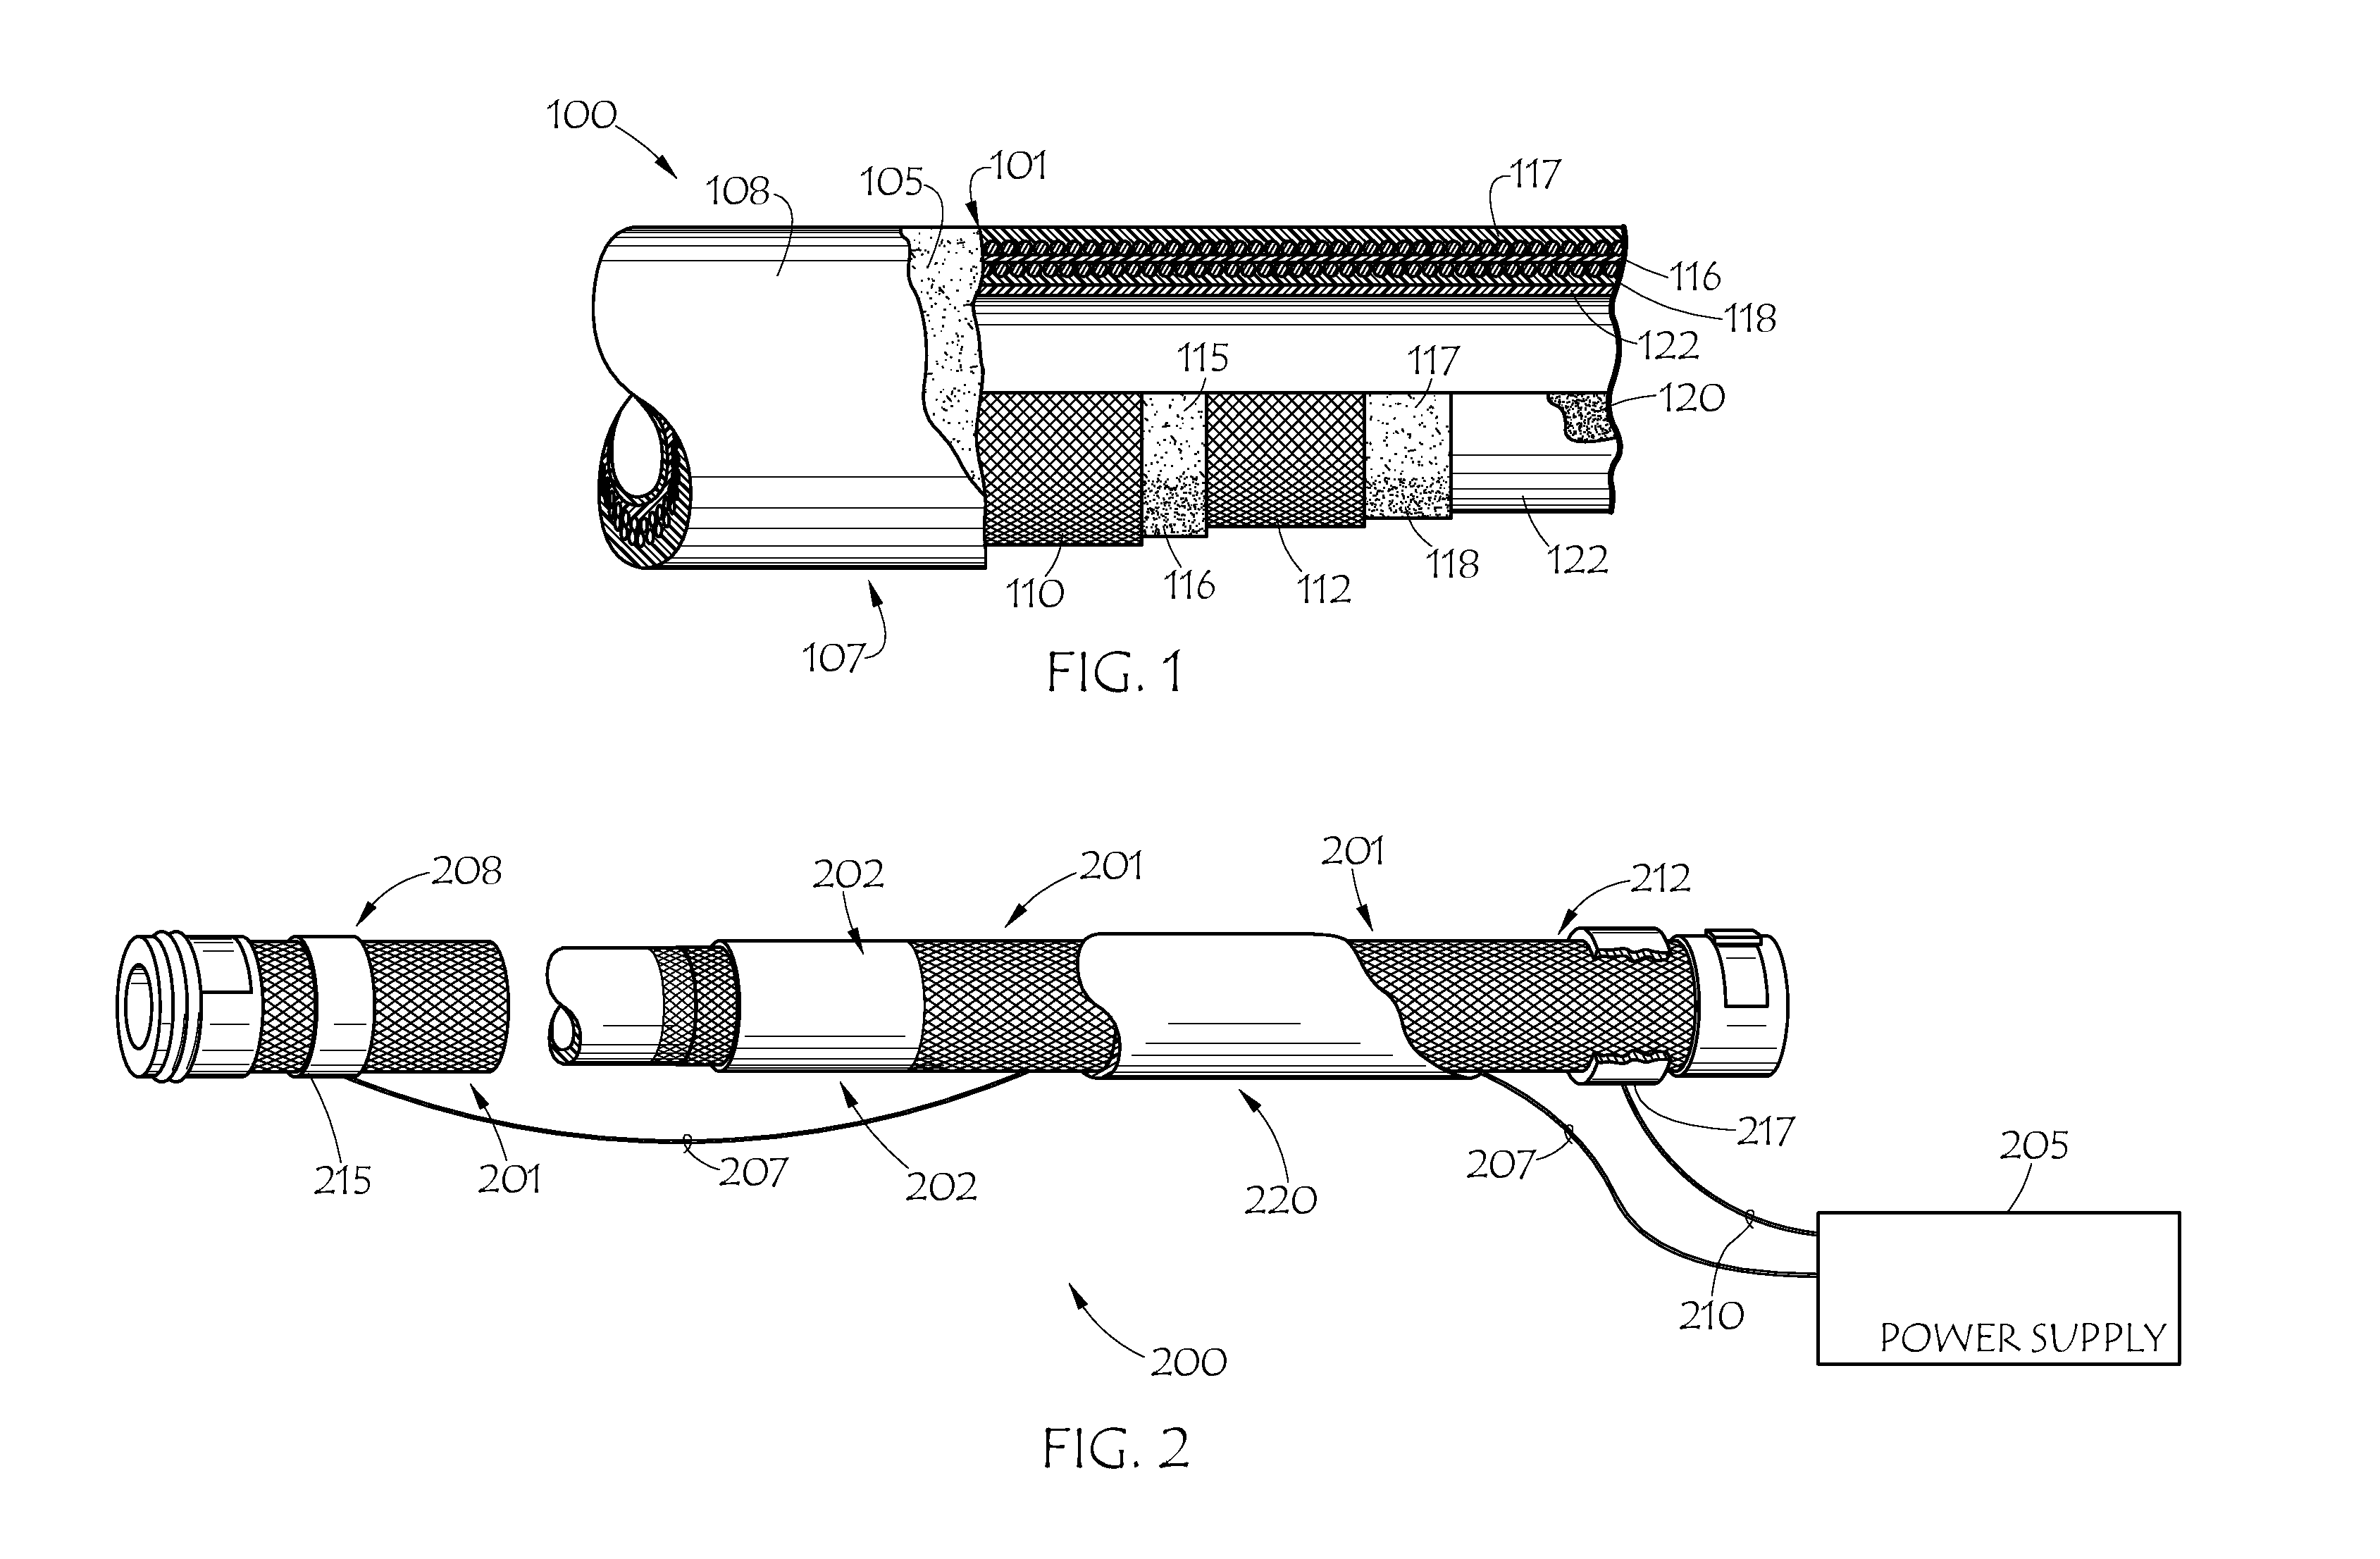 Heated fluid conduit end covers, systems and methods